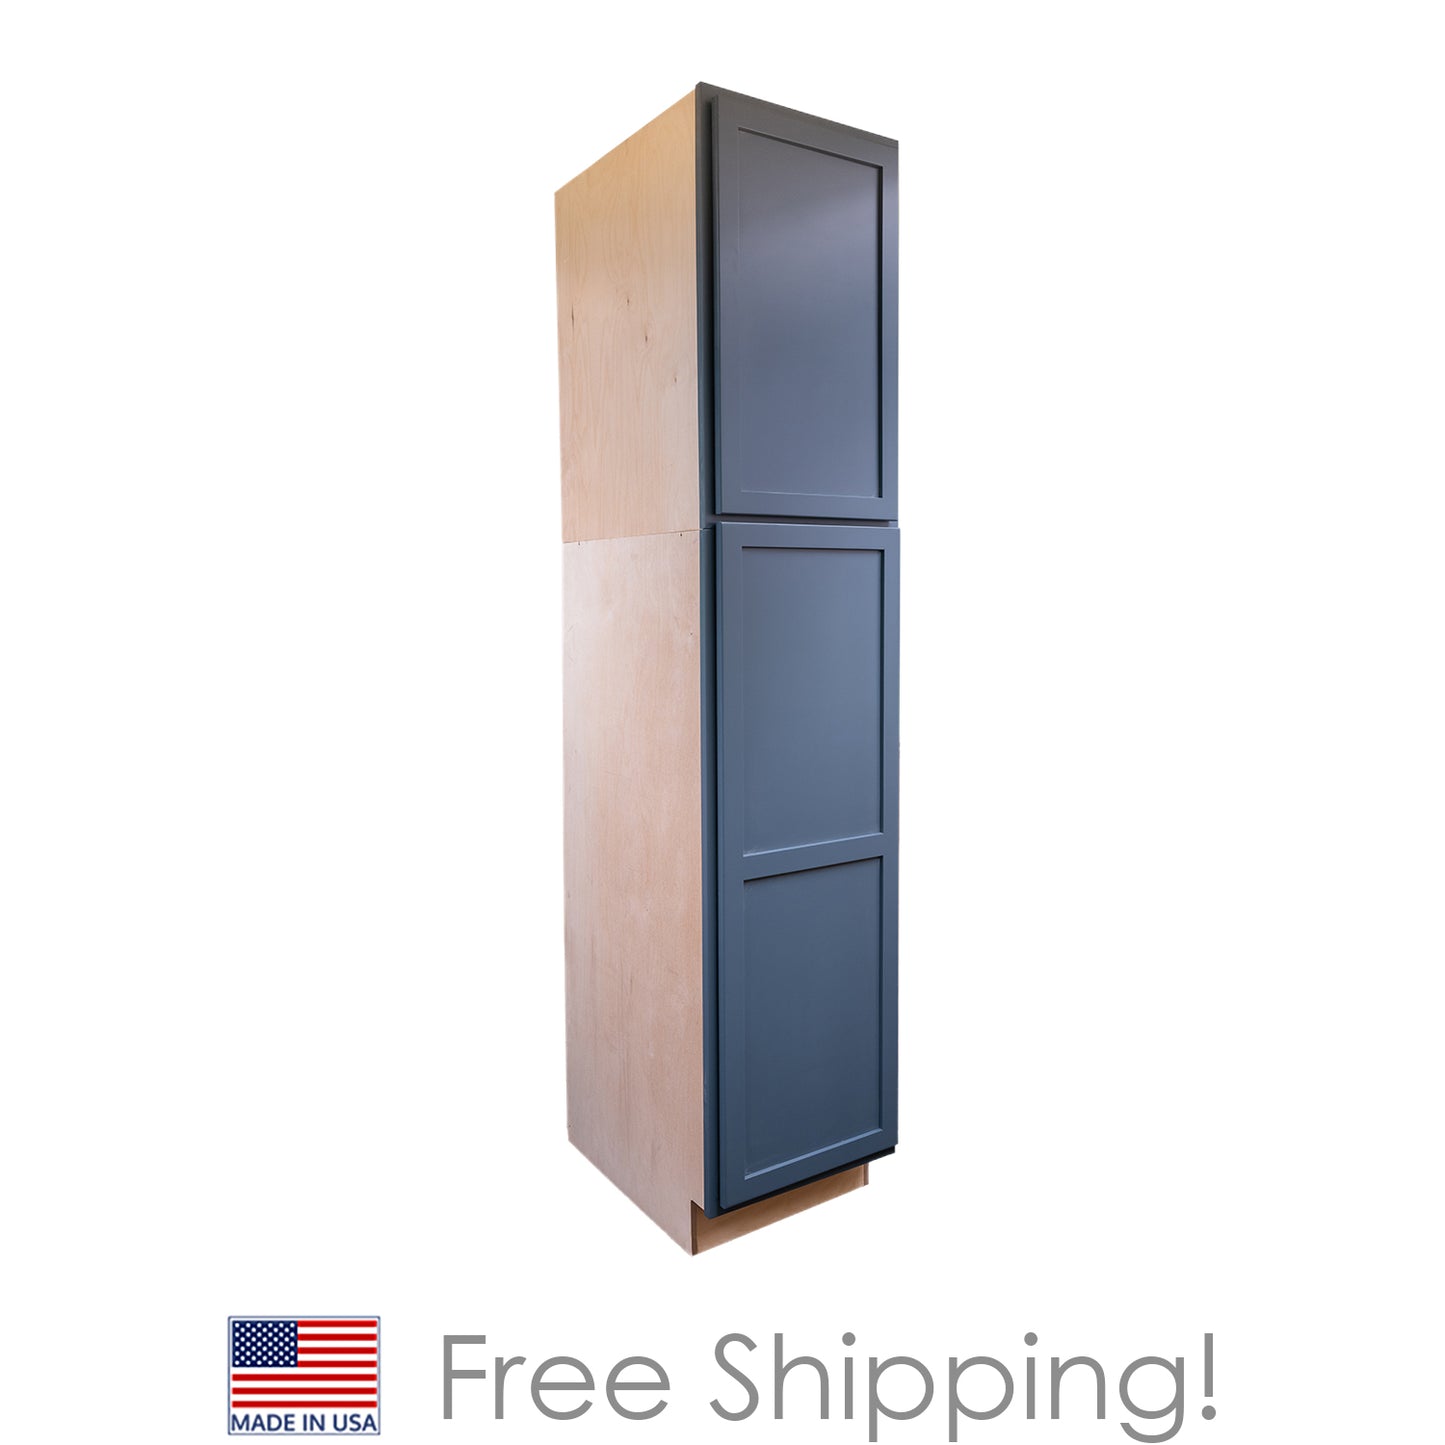 Quicklock RTA (Ready-to-Assemble) Needlepoint Navy Pantry Cabinet 18"Wx84"Hx24"D